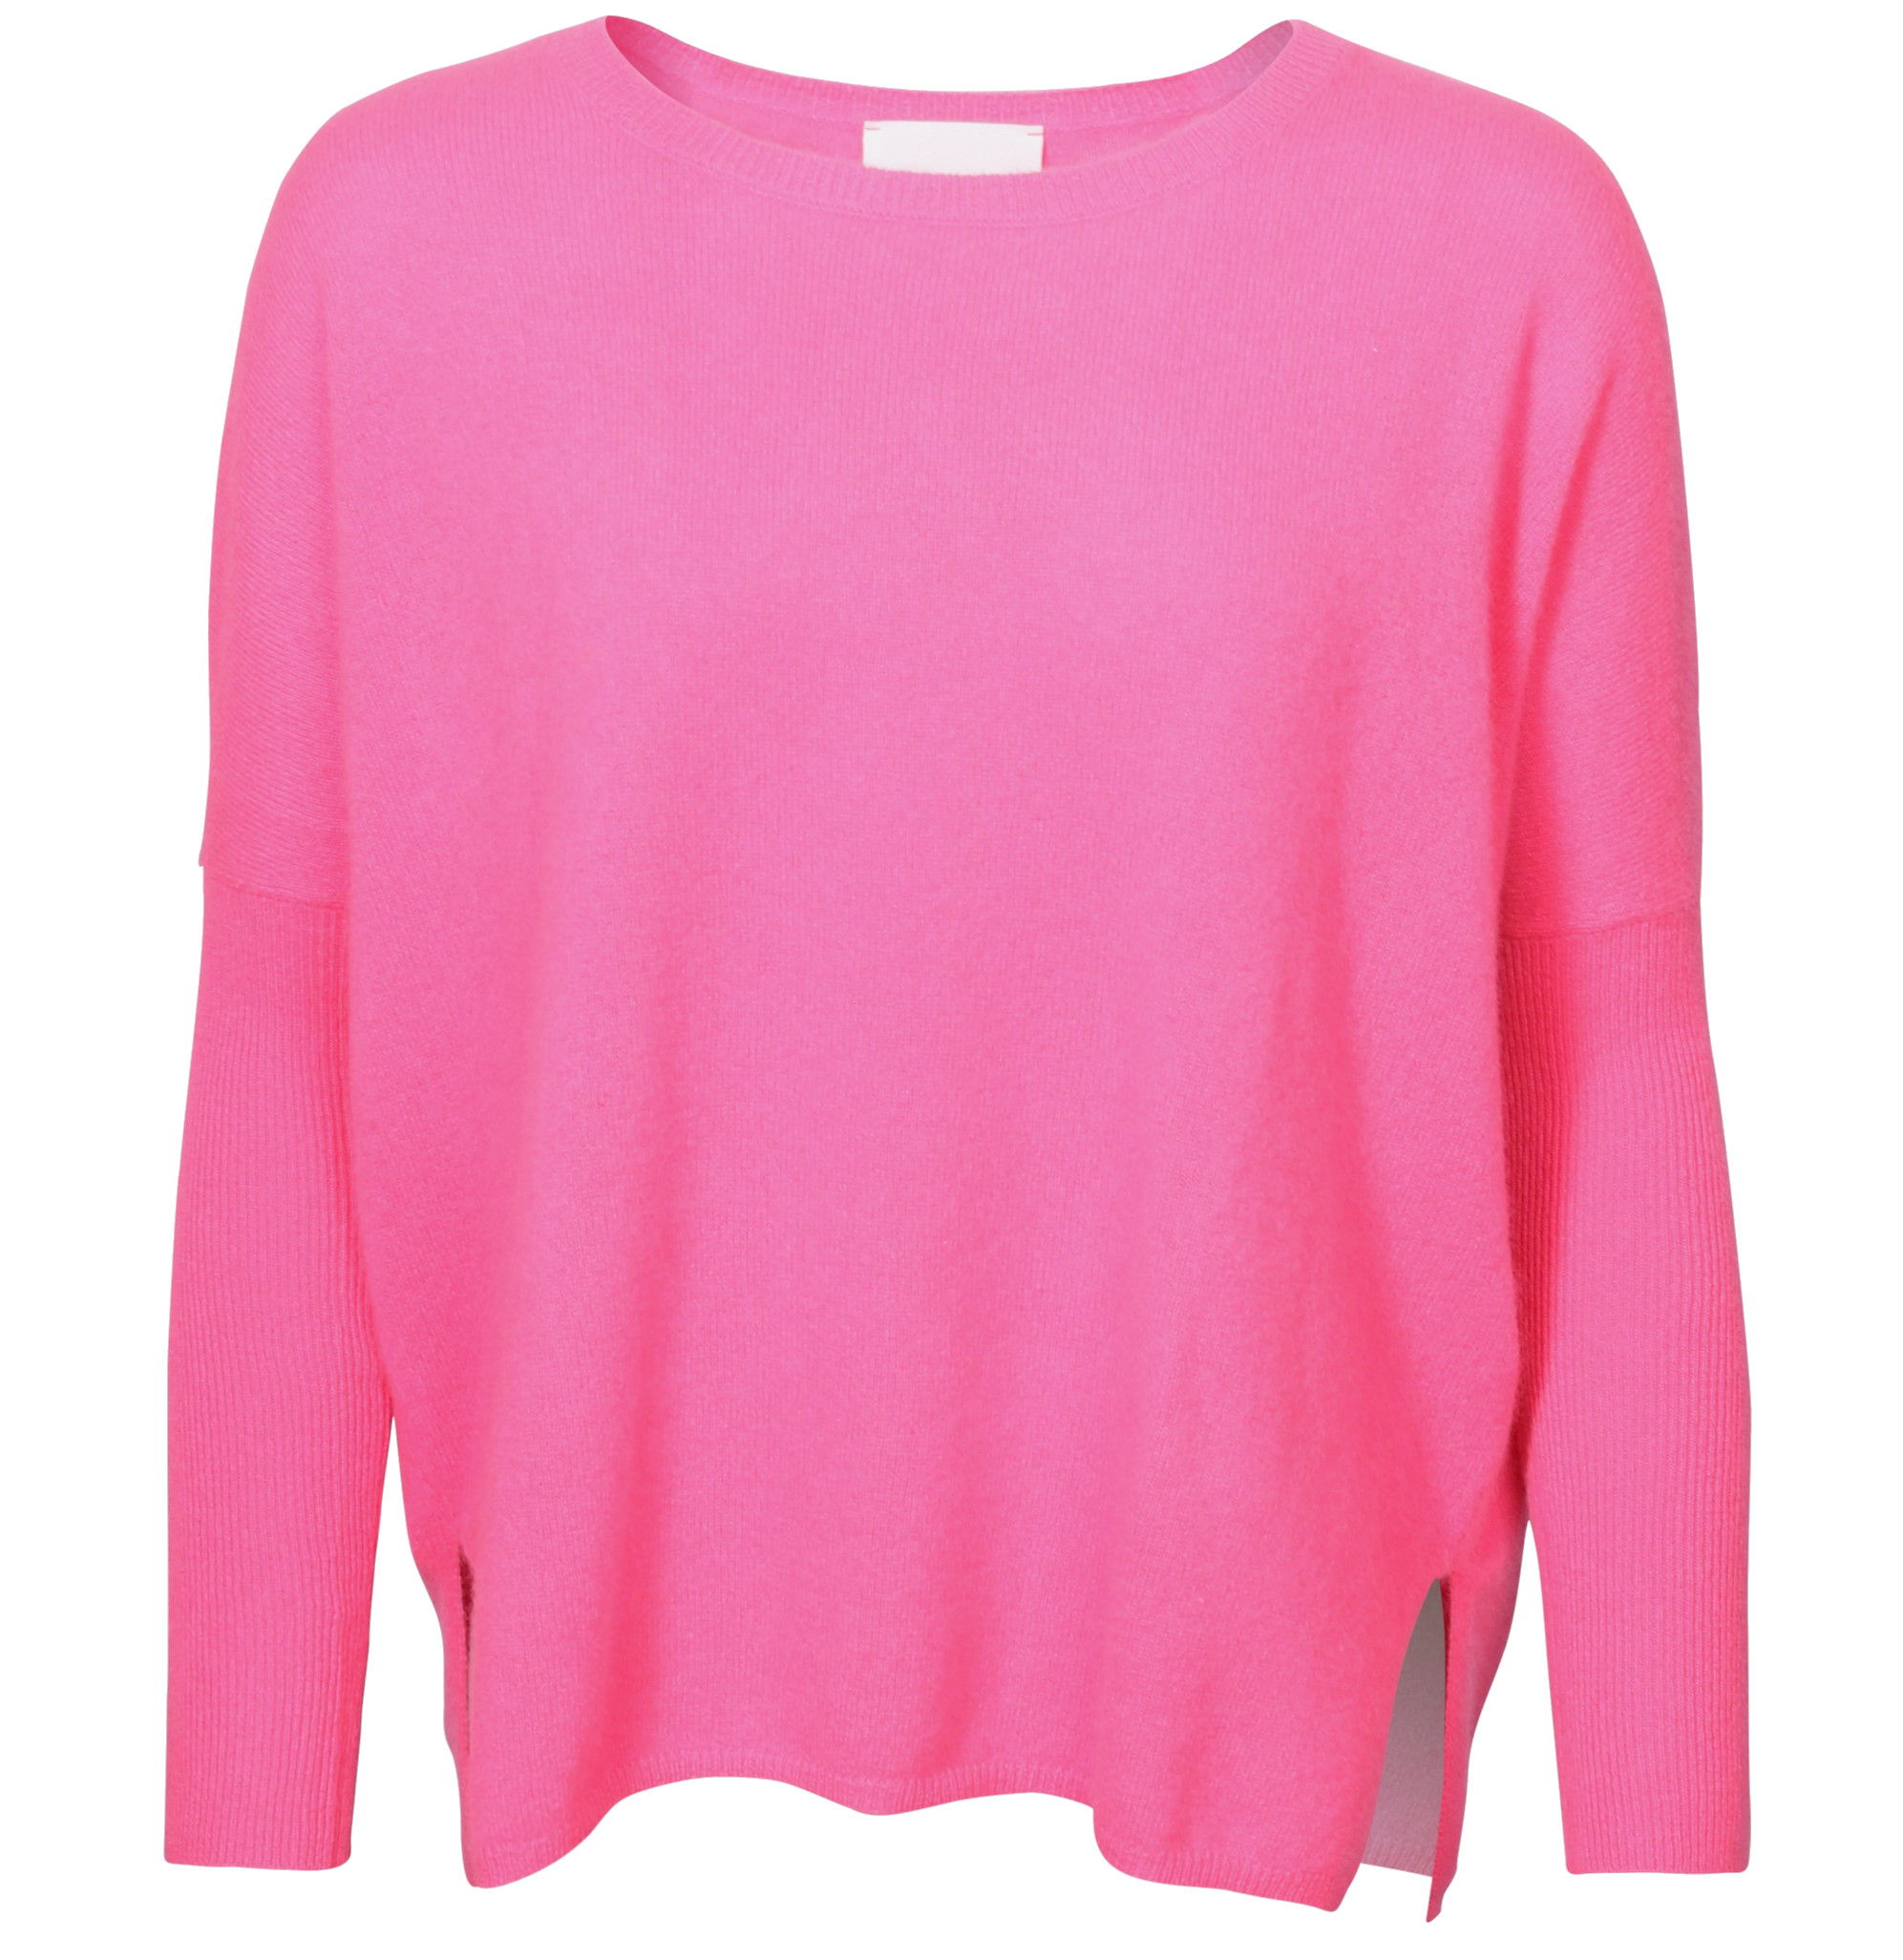 ABSOLUT CASHMERE Poncho Sweater Astrid in Fluo Pink M